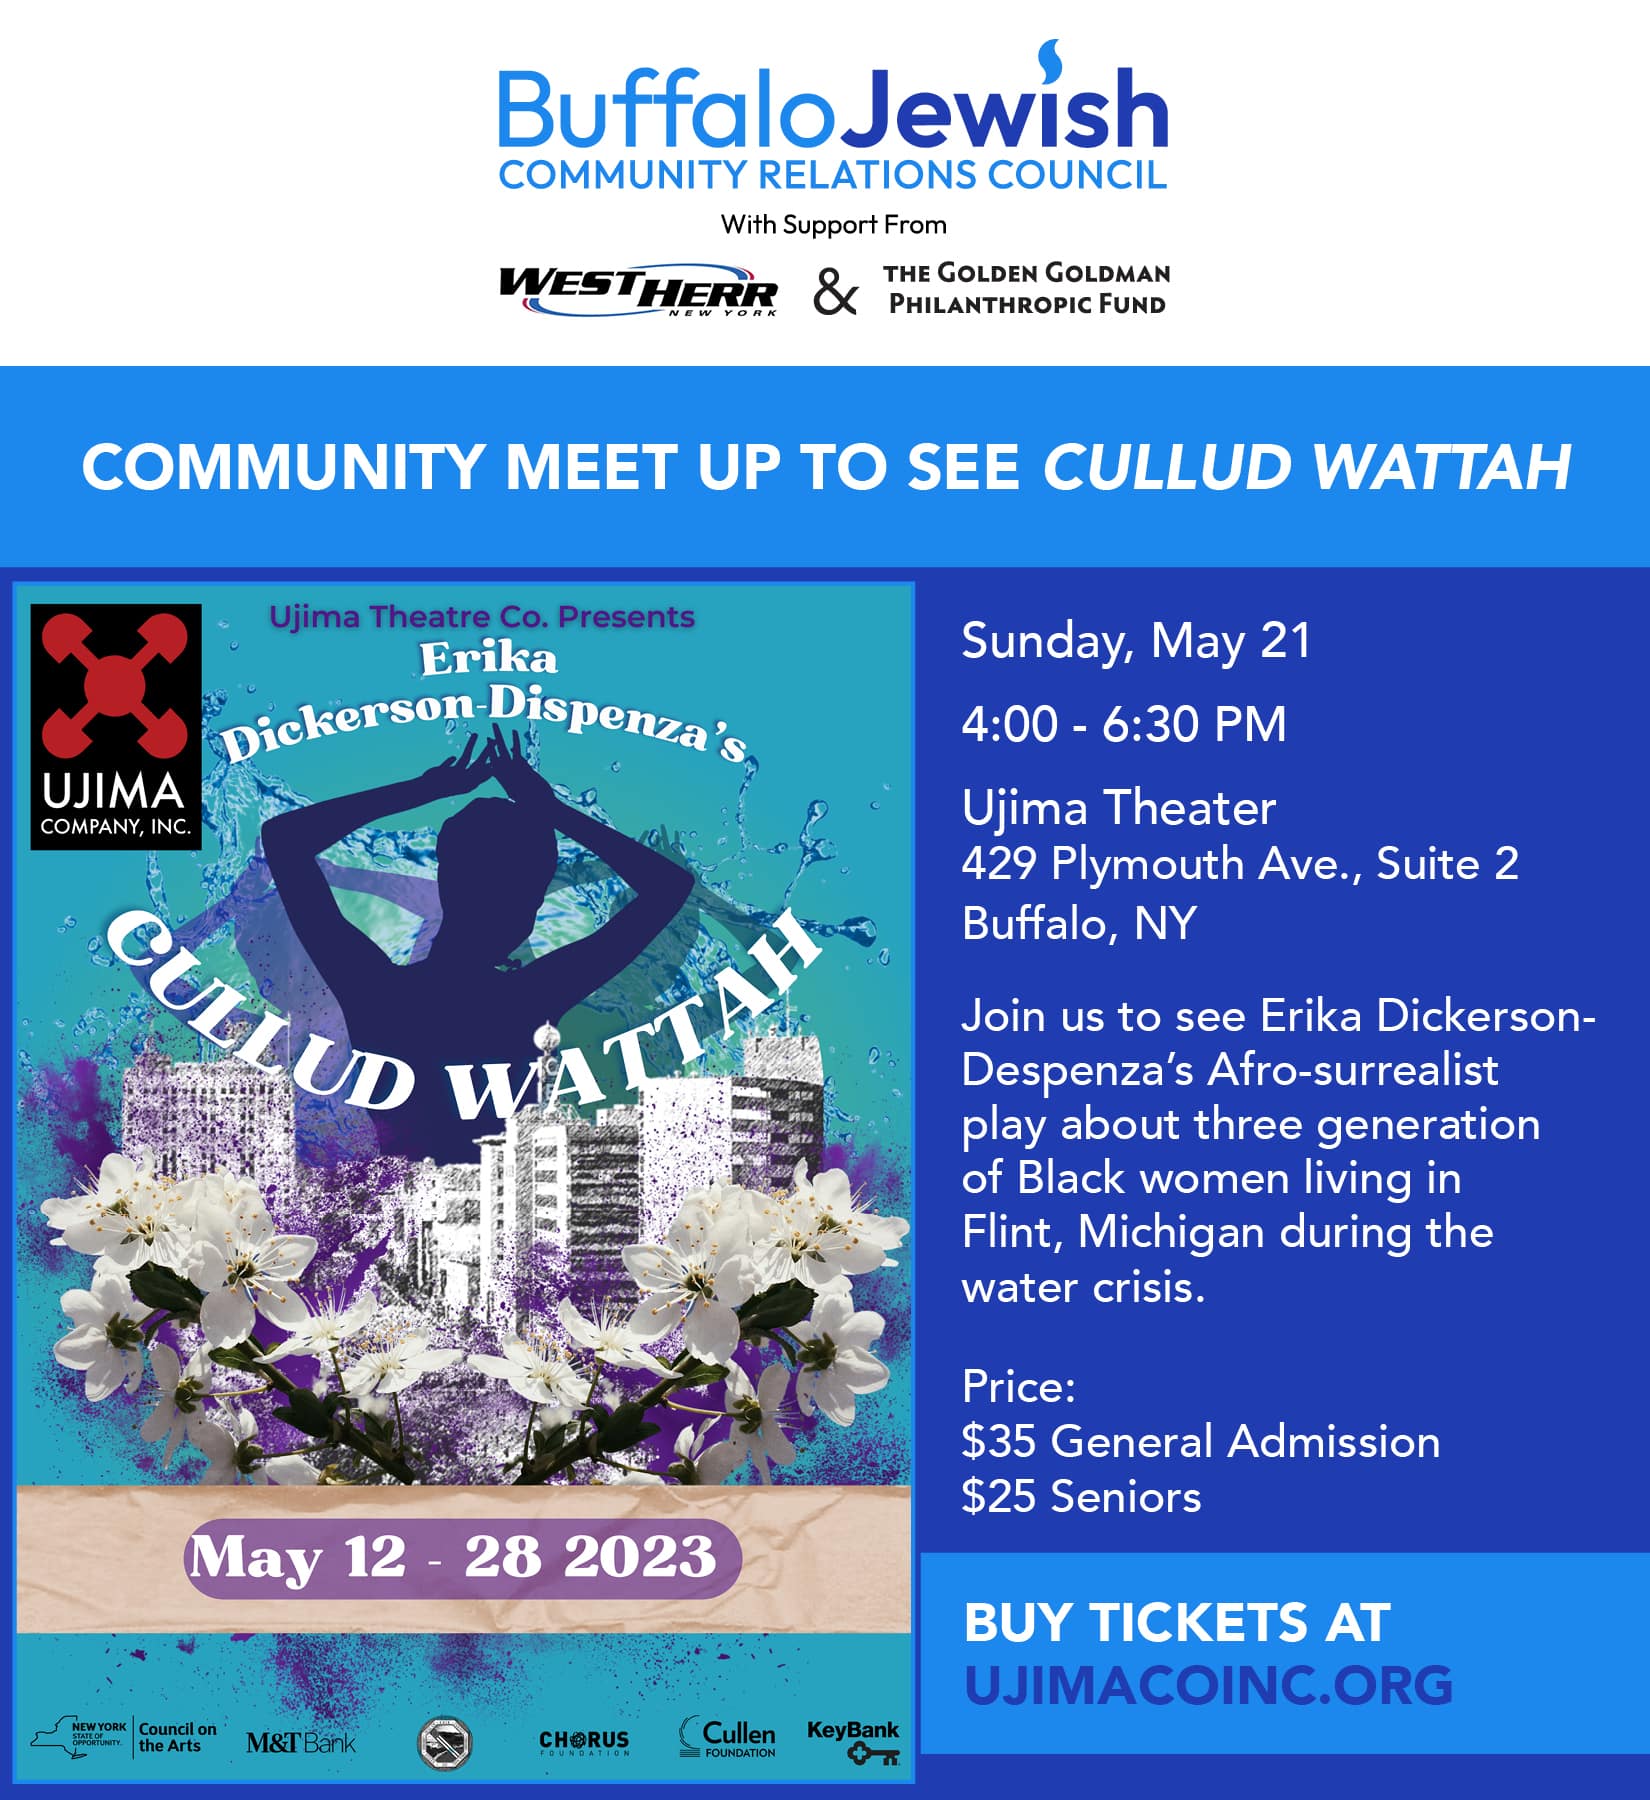 Community meet up to see Cullud Wattah at Ujima Theater - JCRC cullud wattah event